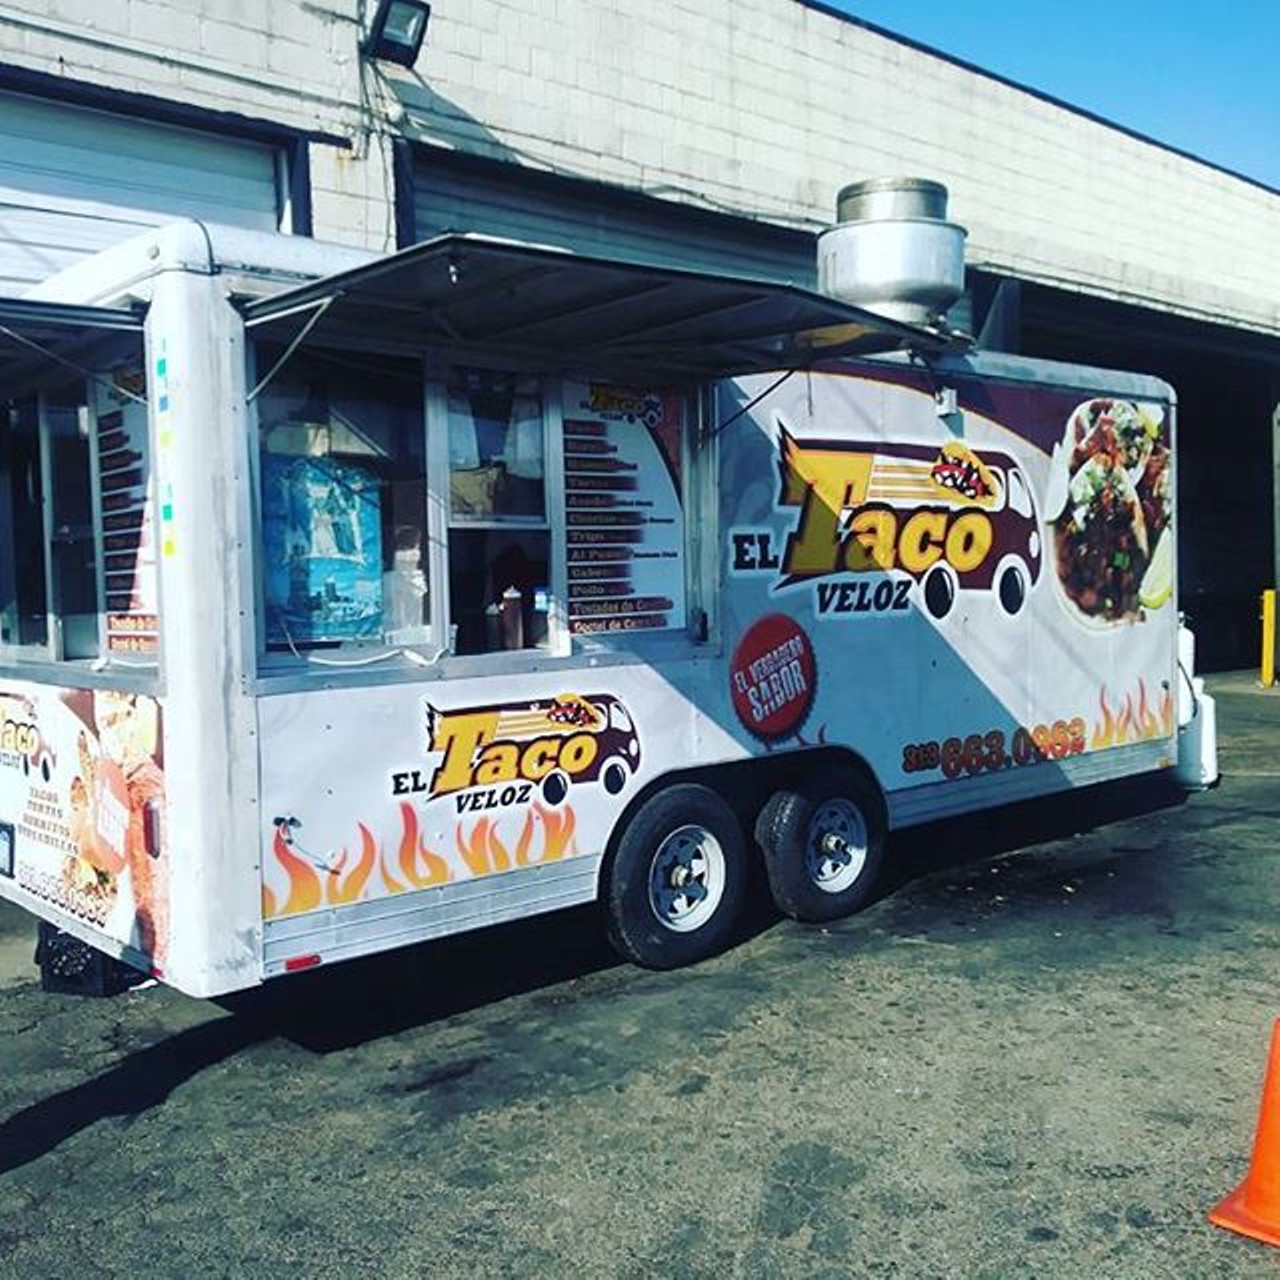 El Volez Taco
6172 Toledo St., Detroit;
The beloved El Taco Veloz taco truck is running a new location in the former Alley Taco space in Midtown's Marcus Market. And thankfully, the truck at Toledo and Livernois is still rolling. The authentic Mexican food spot now has a sit down location.
Photo via Instagram user @lakesofblood